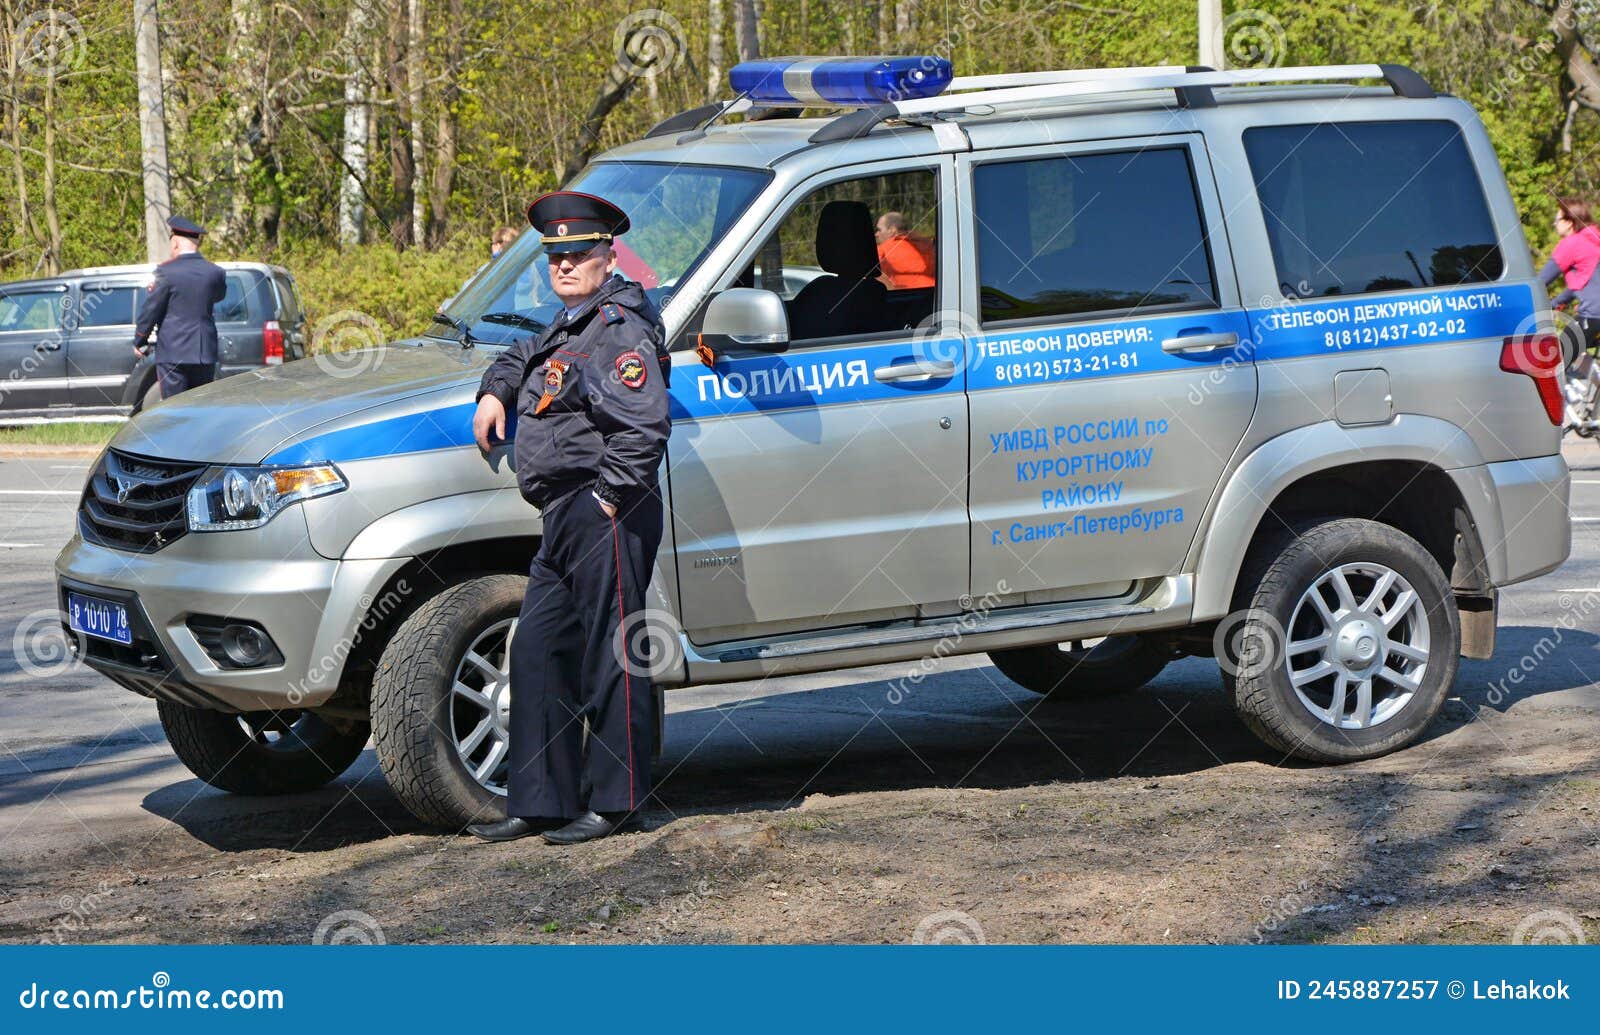 ZELENOGORSK, RUSSIA - MAY 9: Police Cars Exhibited at the Annual